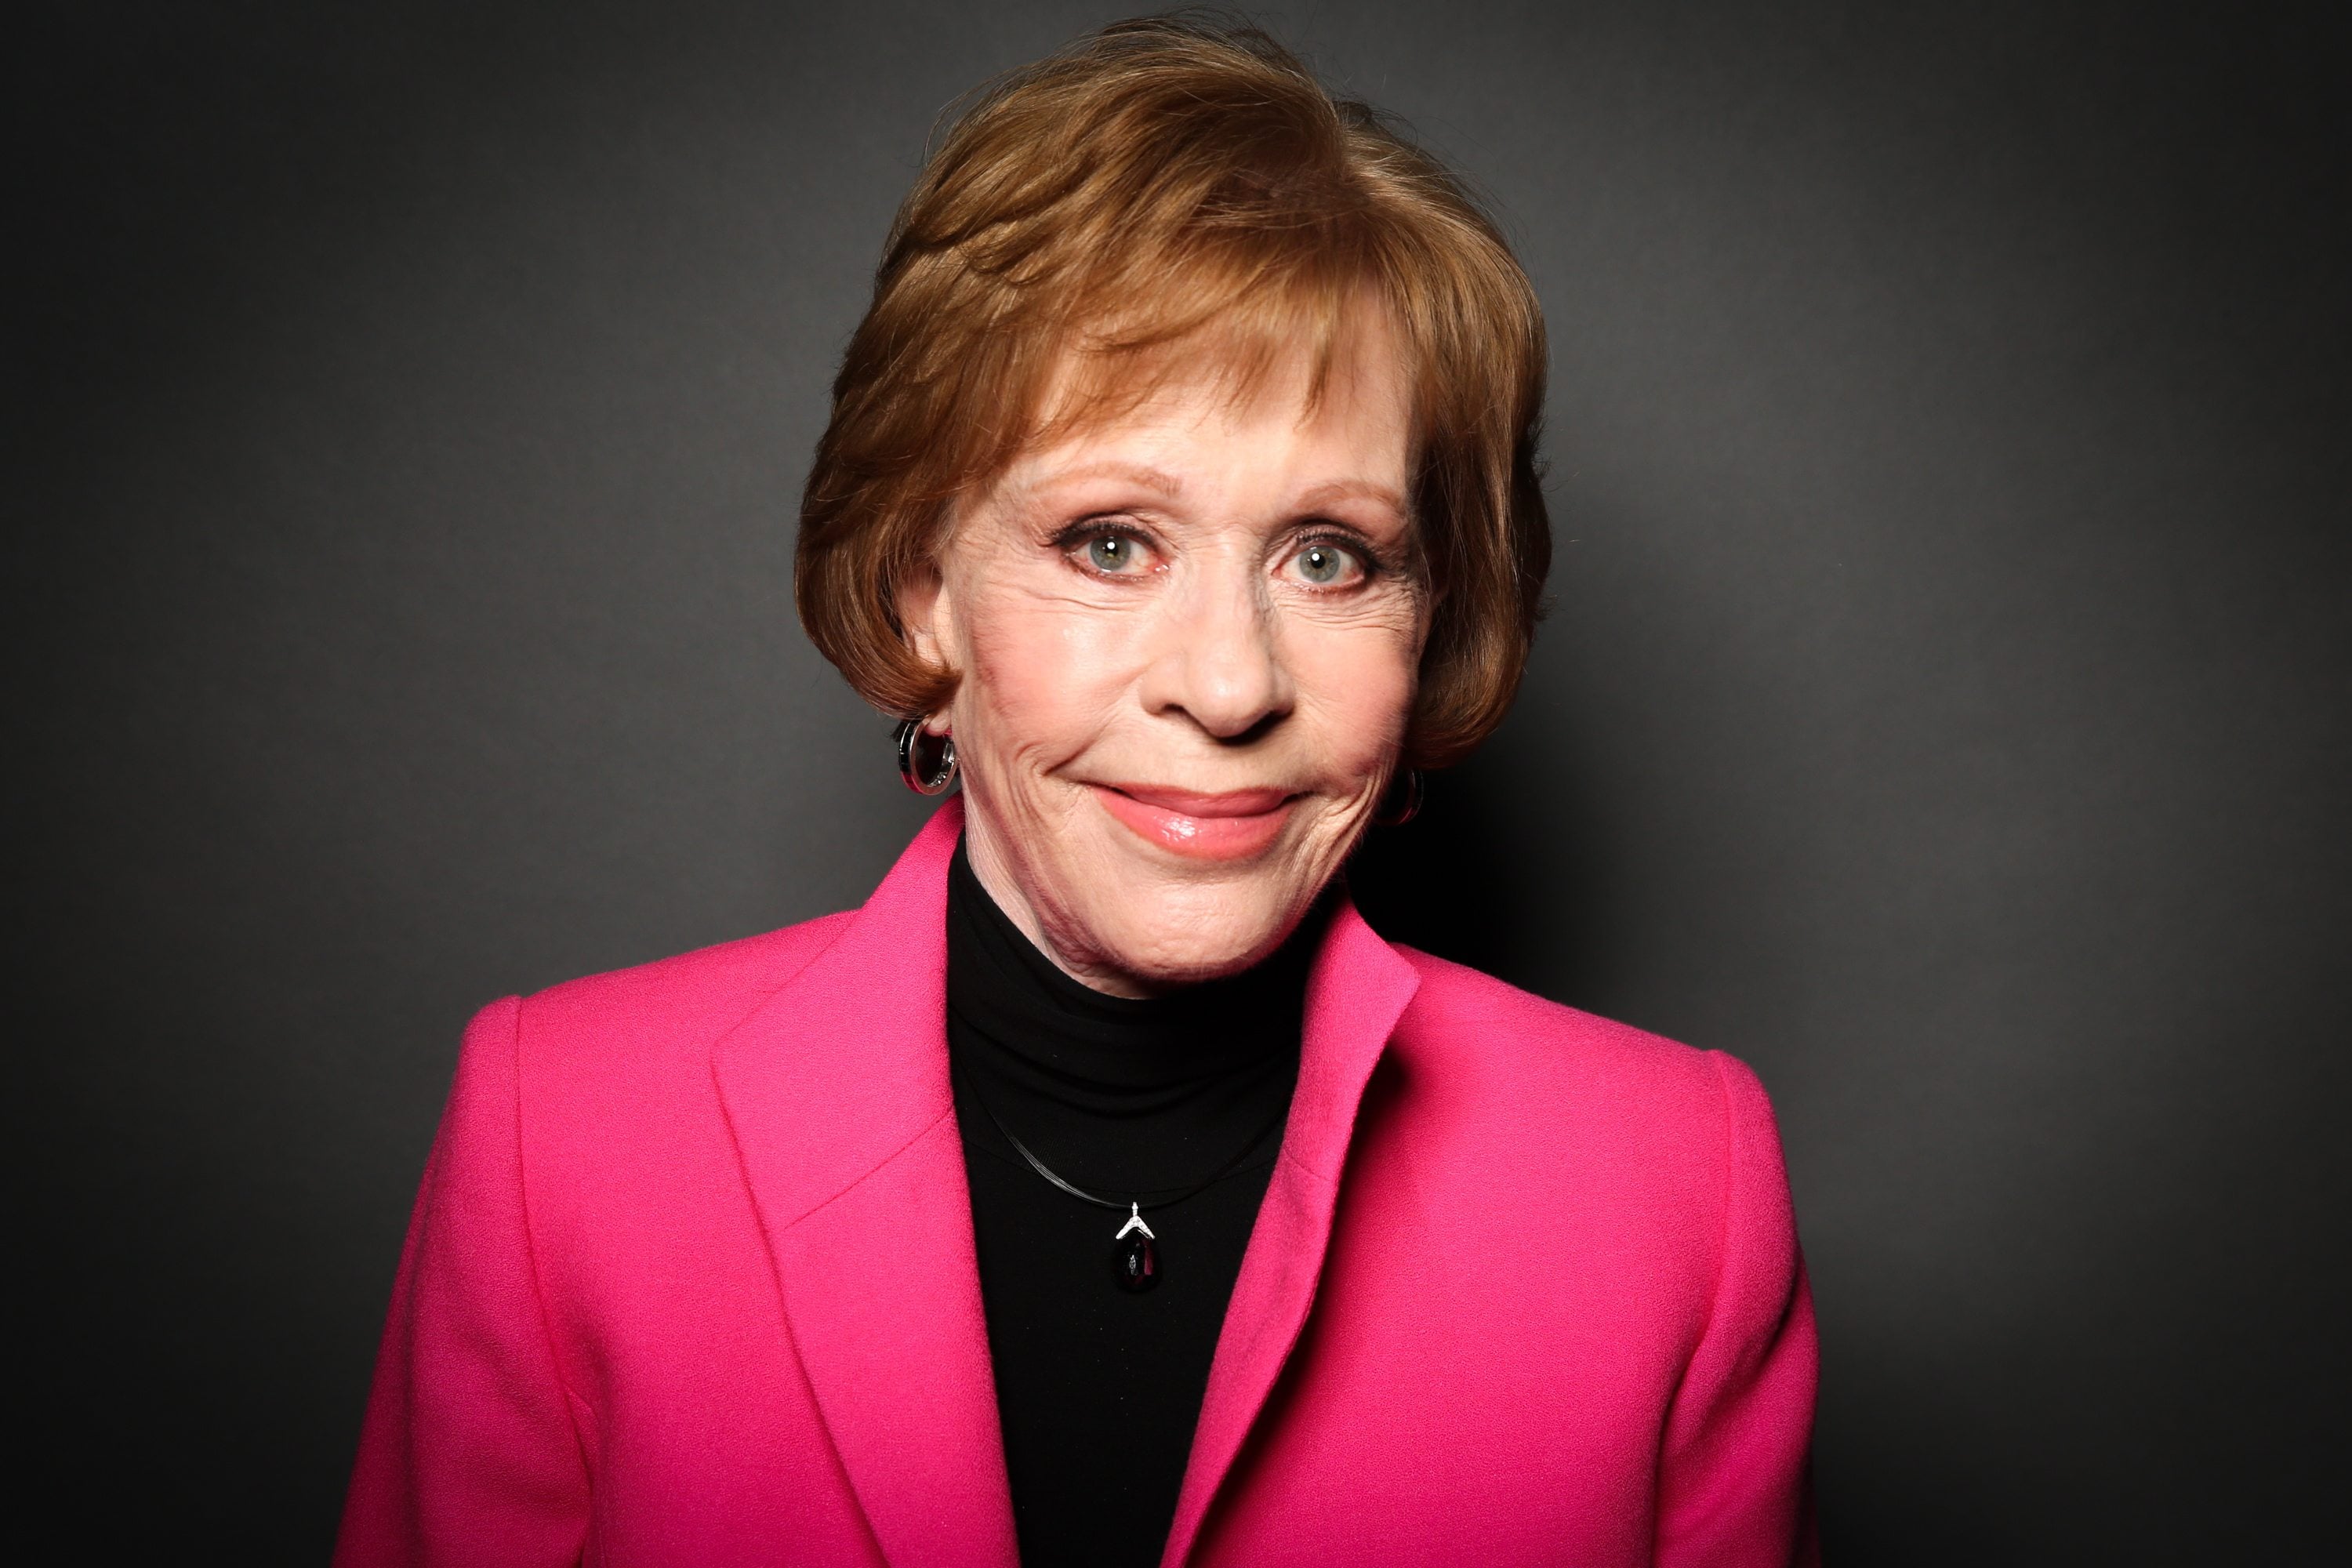 Carol Burnett says her Life Achievement Award from the Screen Actors Guild is special because it comes not only from fellow TV performers, but also from movie stars.